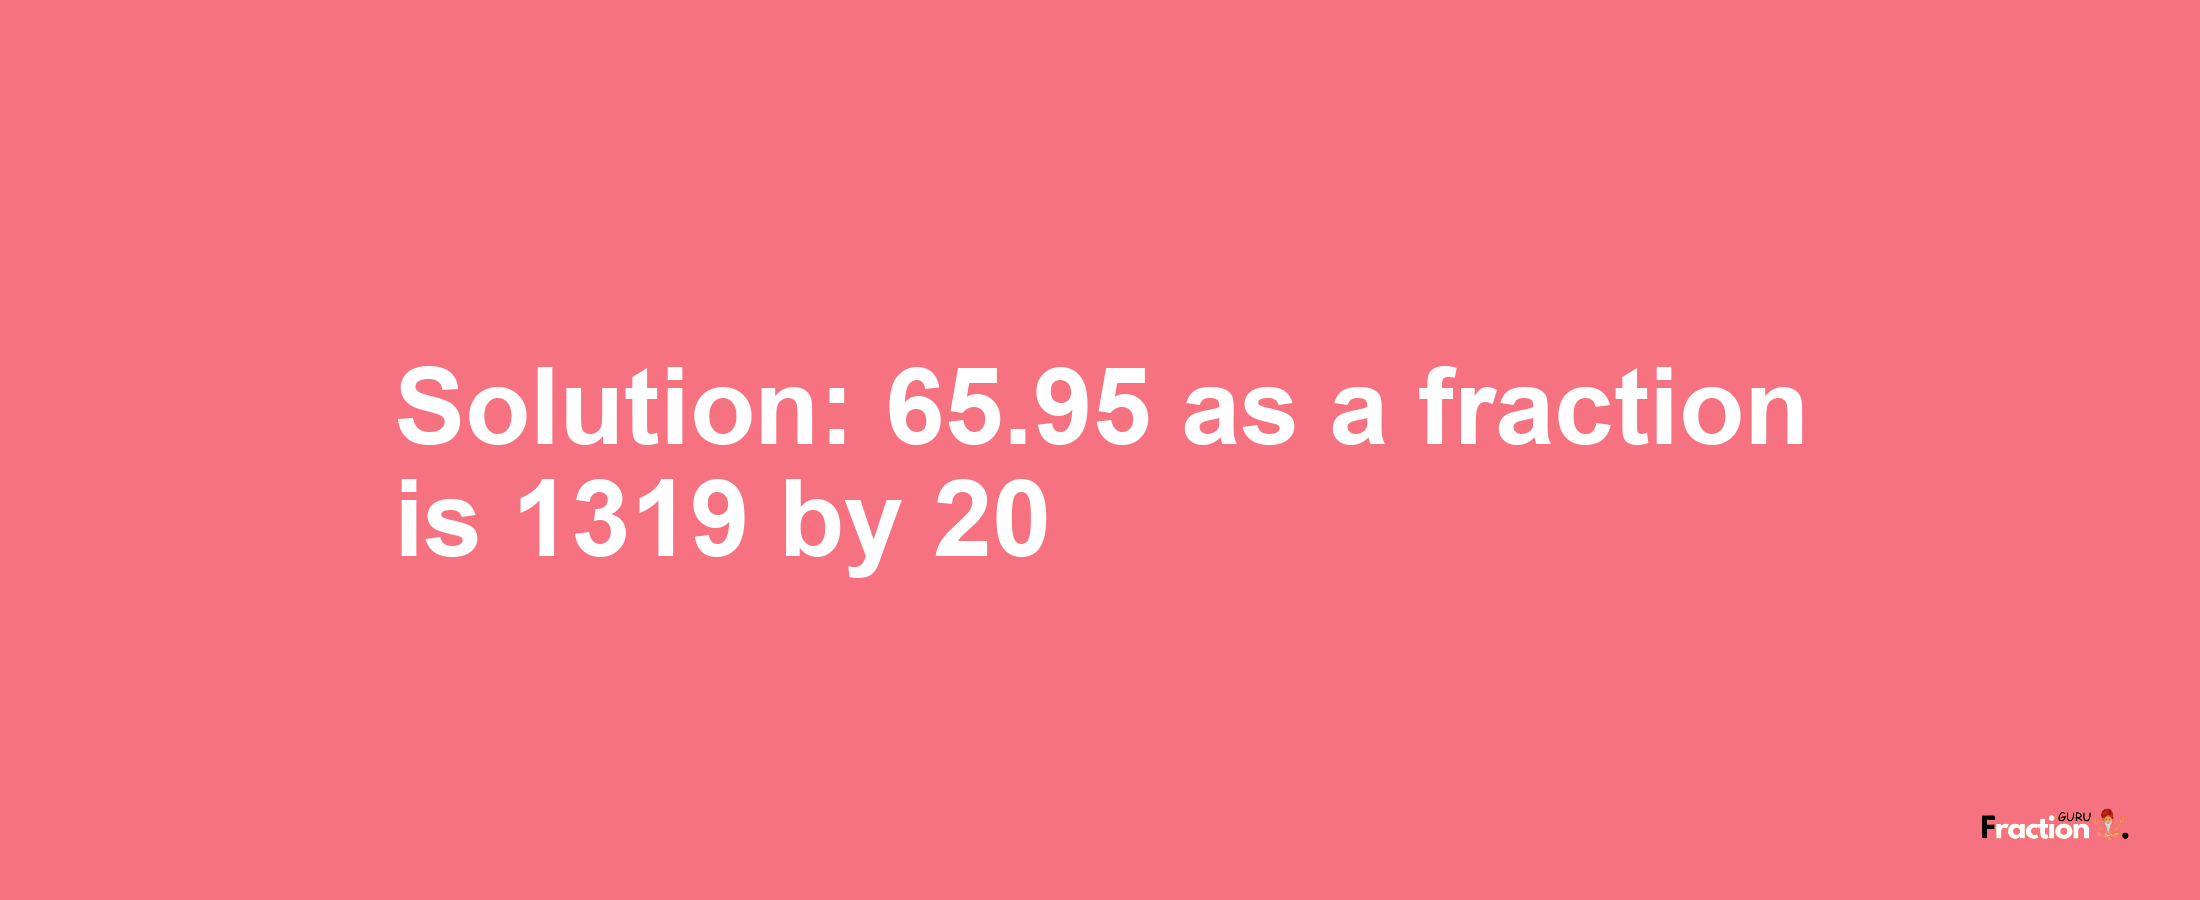 Solution:65.95 as a fraction is 1319/20